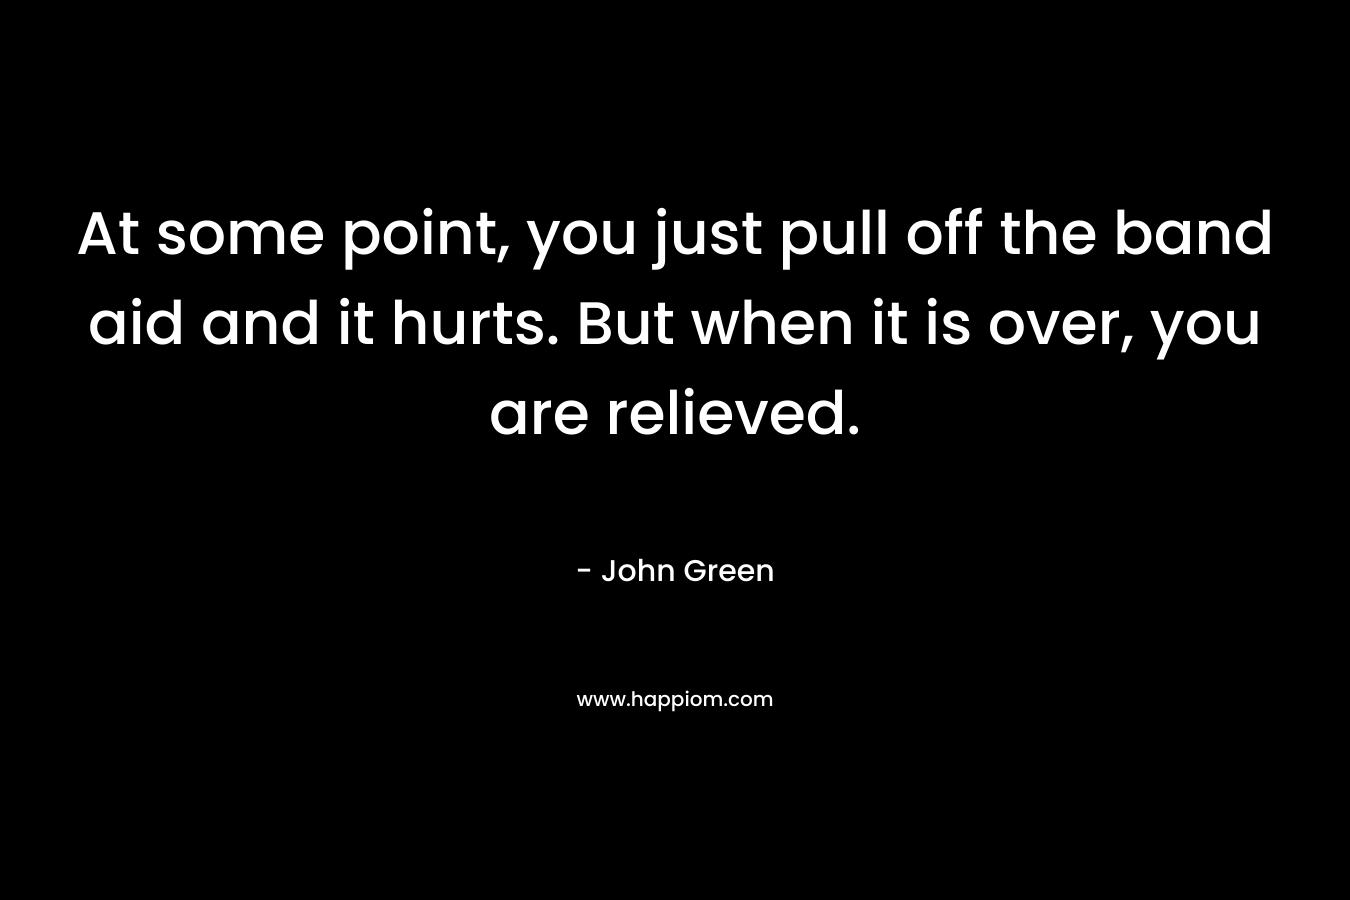 At some point, you just pull off the band aid and it hurts. But when it is over, you are relieved. – John Green